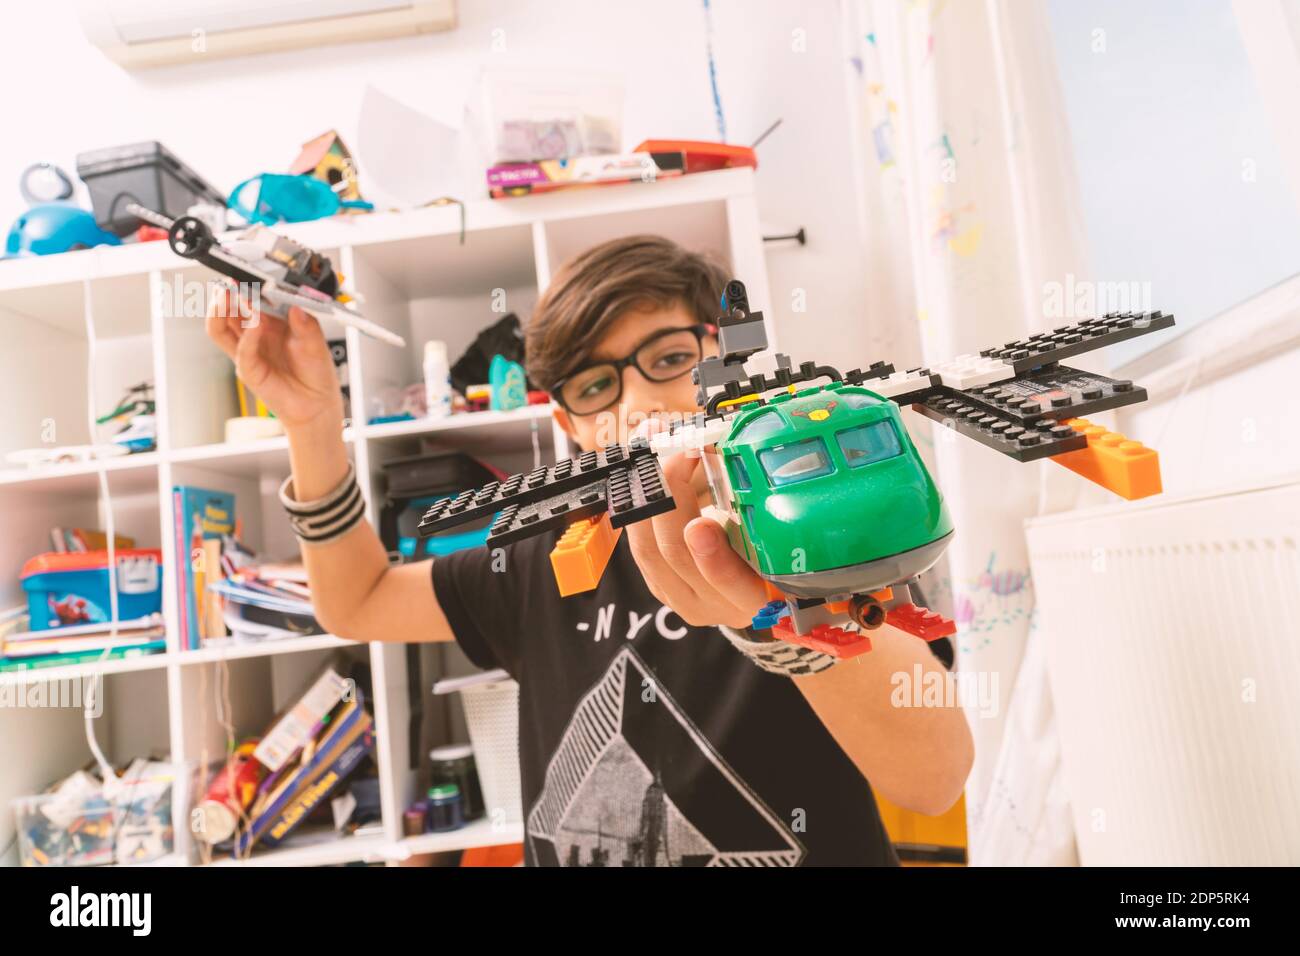 Focus on air craft toy hold by a boy with glasses. The kid is playing alone at home during Covid 9 quarantine. He has a shelf full pf toys. Stock Photo